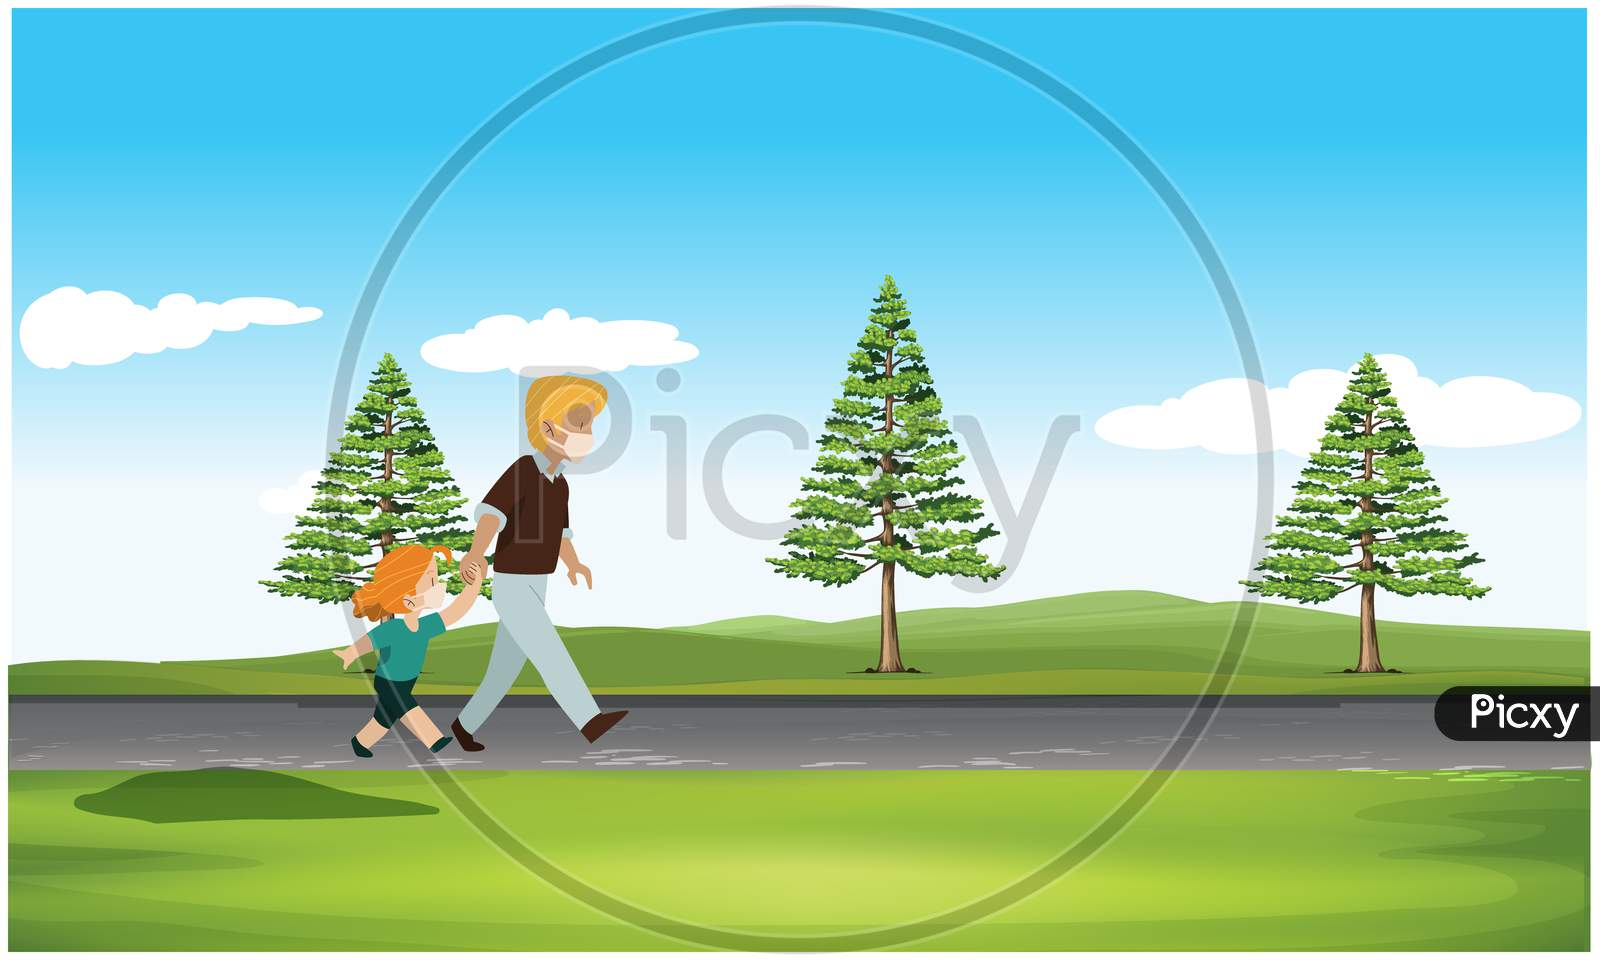 Man Walking With Her Daughter On The Road In The Garden